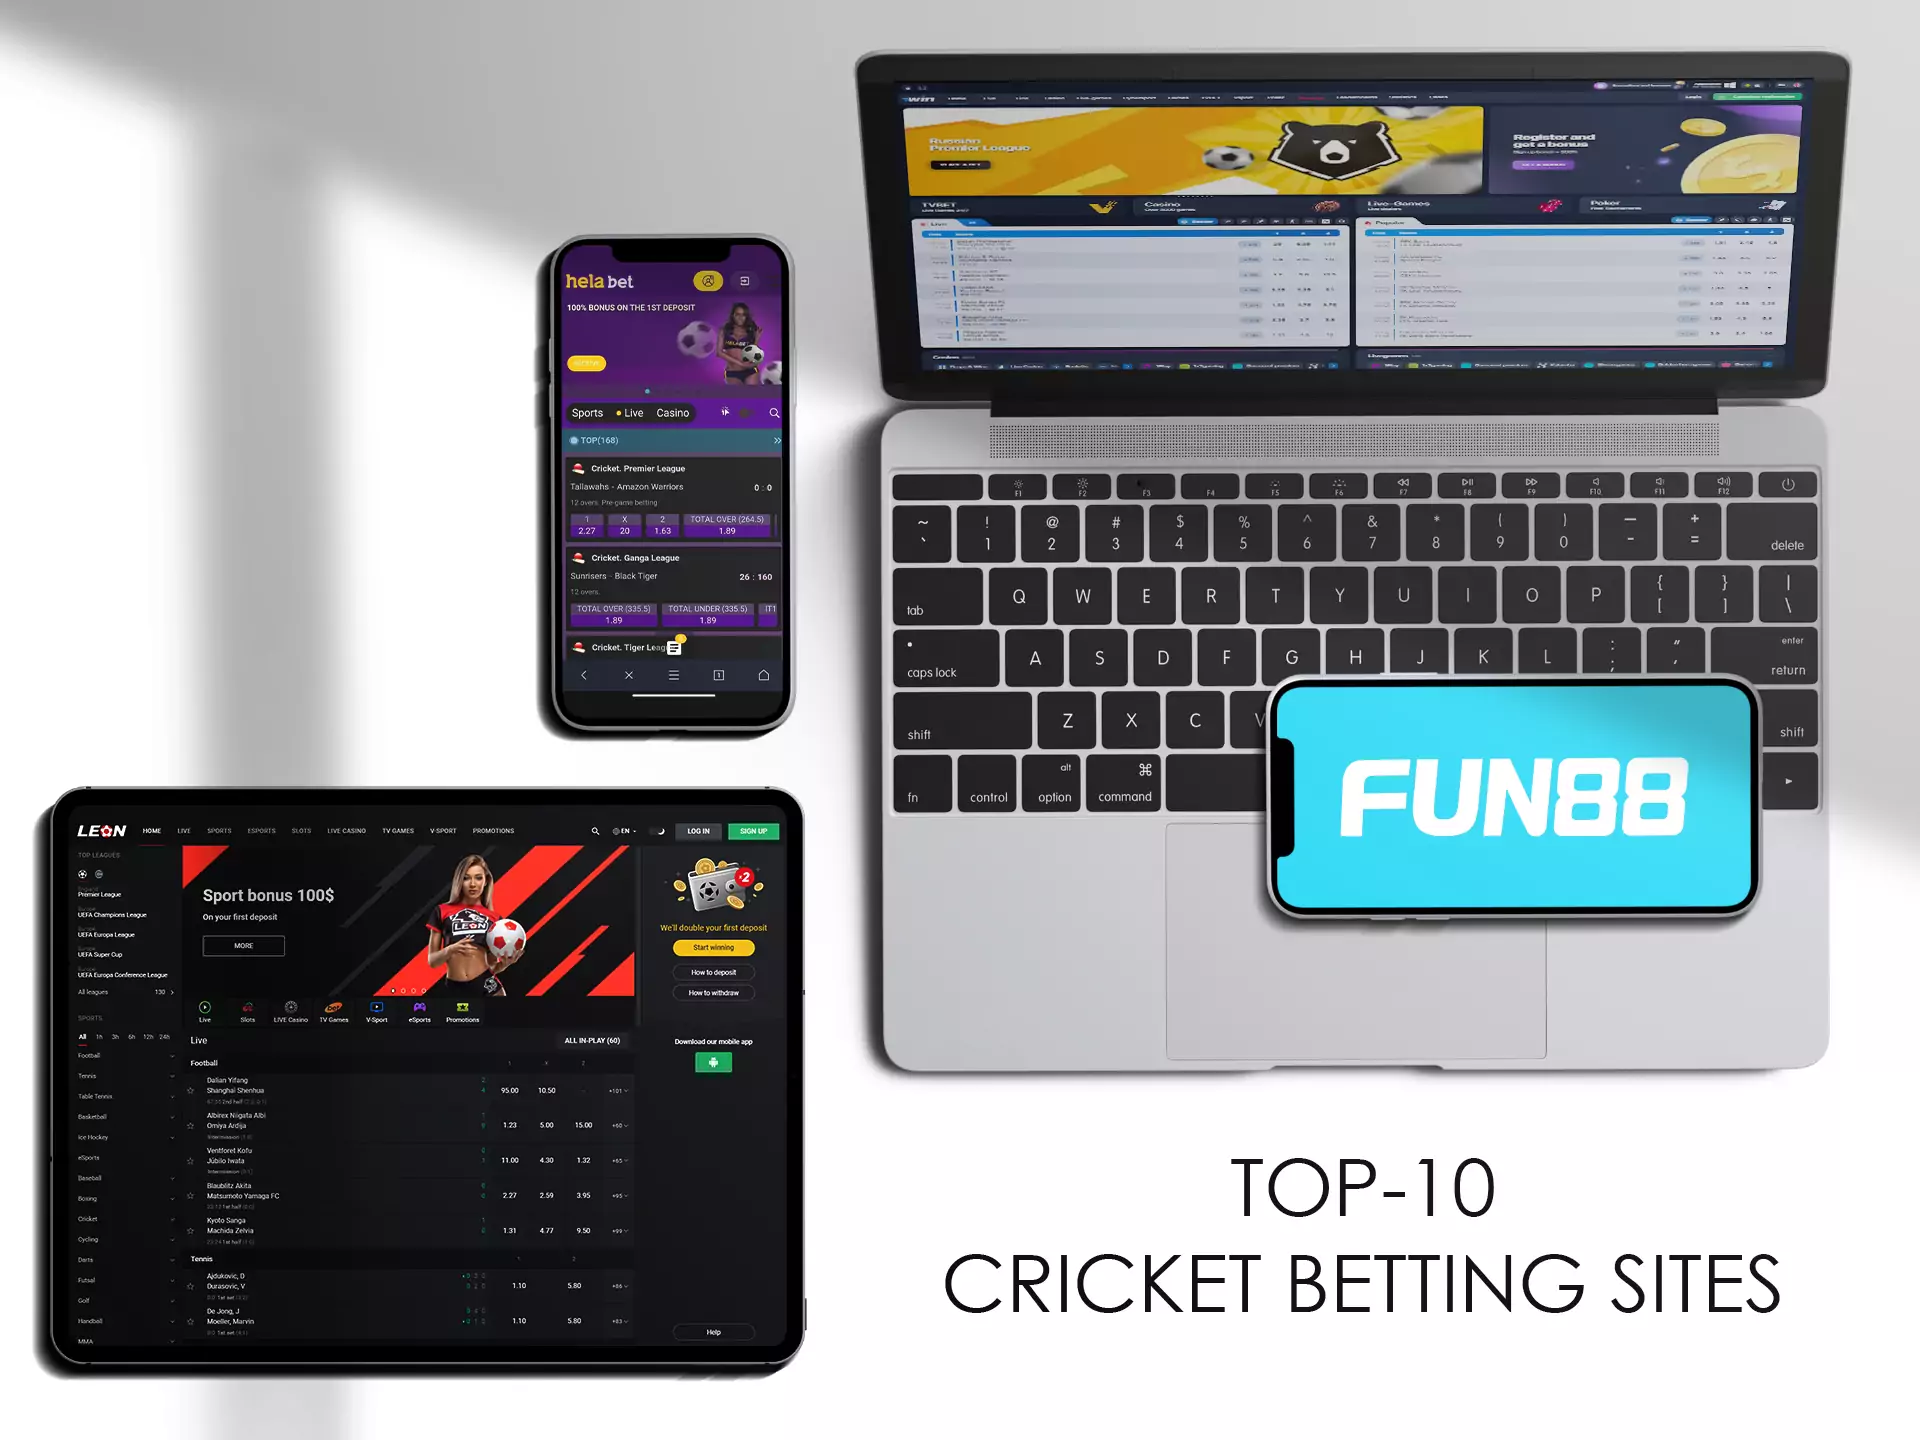 Our experts have prepared a list of the 10 best sites to bet on cricket.